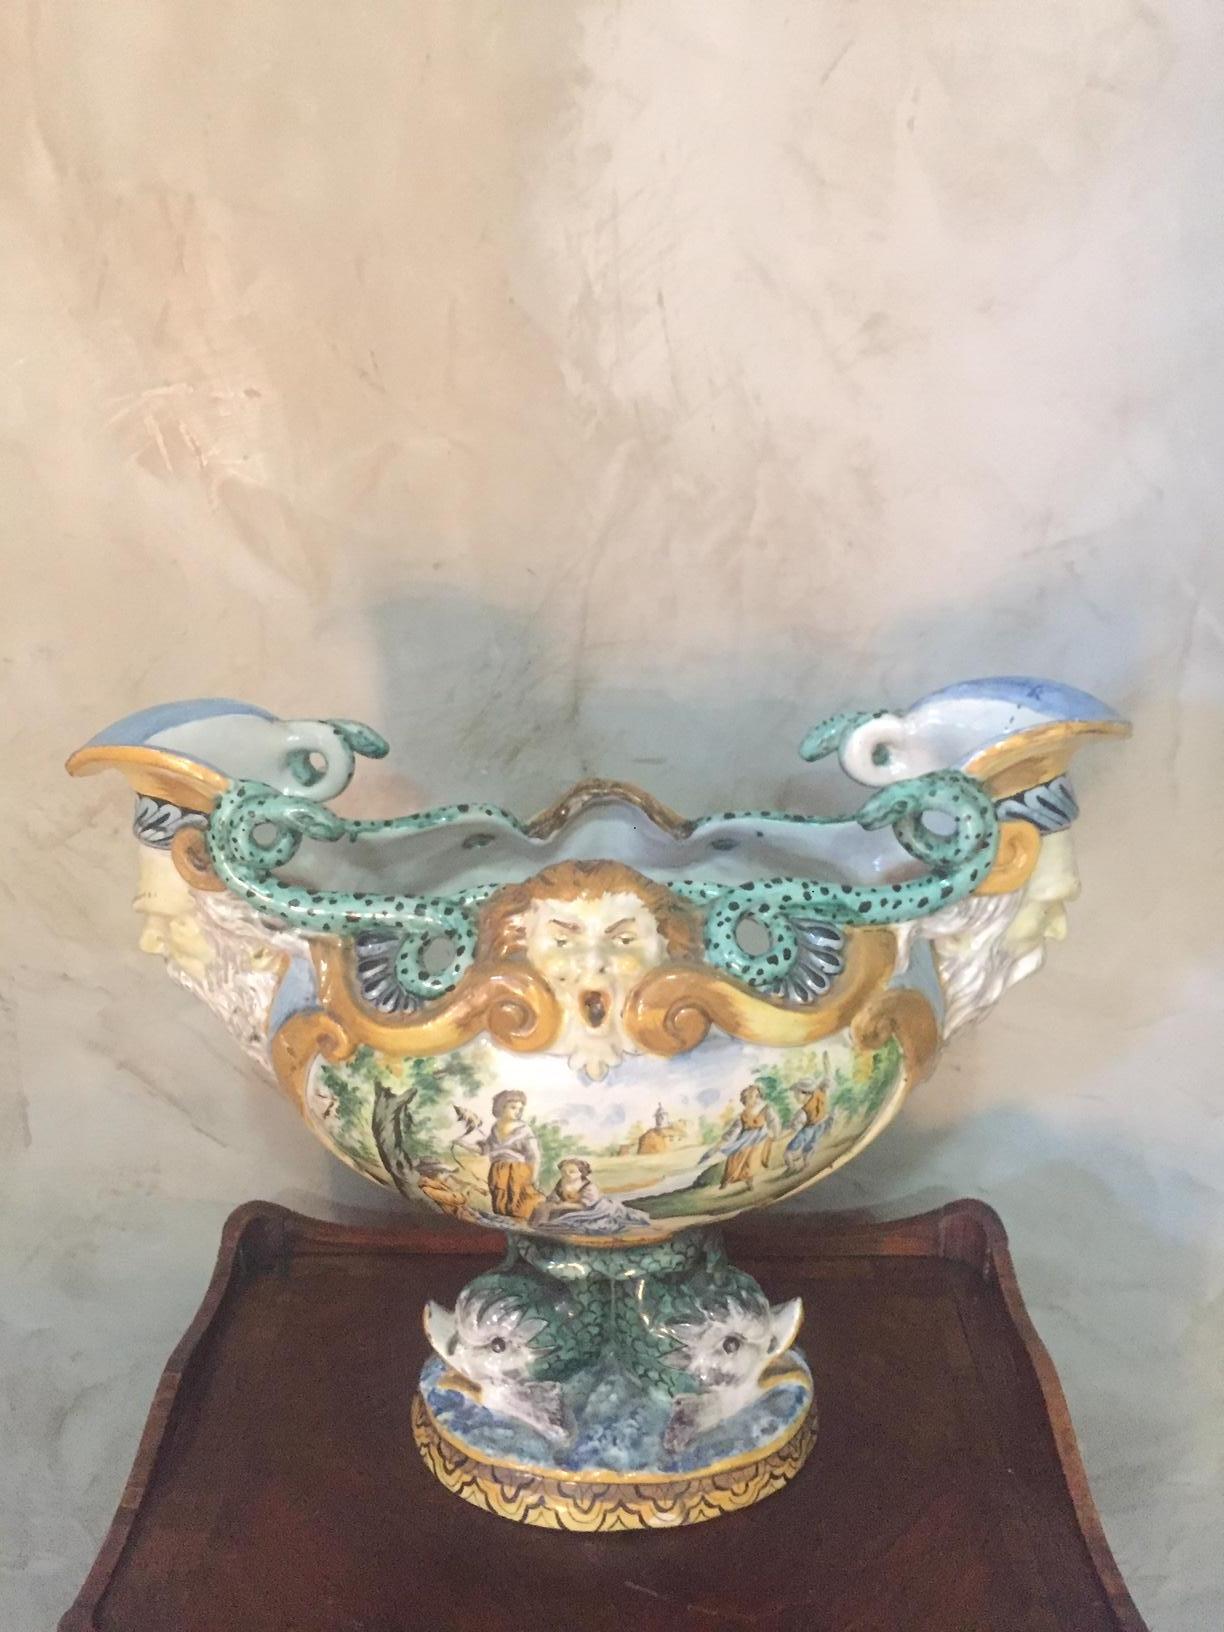 Original and rare late 18th century Italian Faience Jardiniere in very good condition. 
Painting landscapes, men's faces on the two extremities and green snakes. Ducks on the base. Very high quality and rare piece. Very nice details.